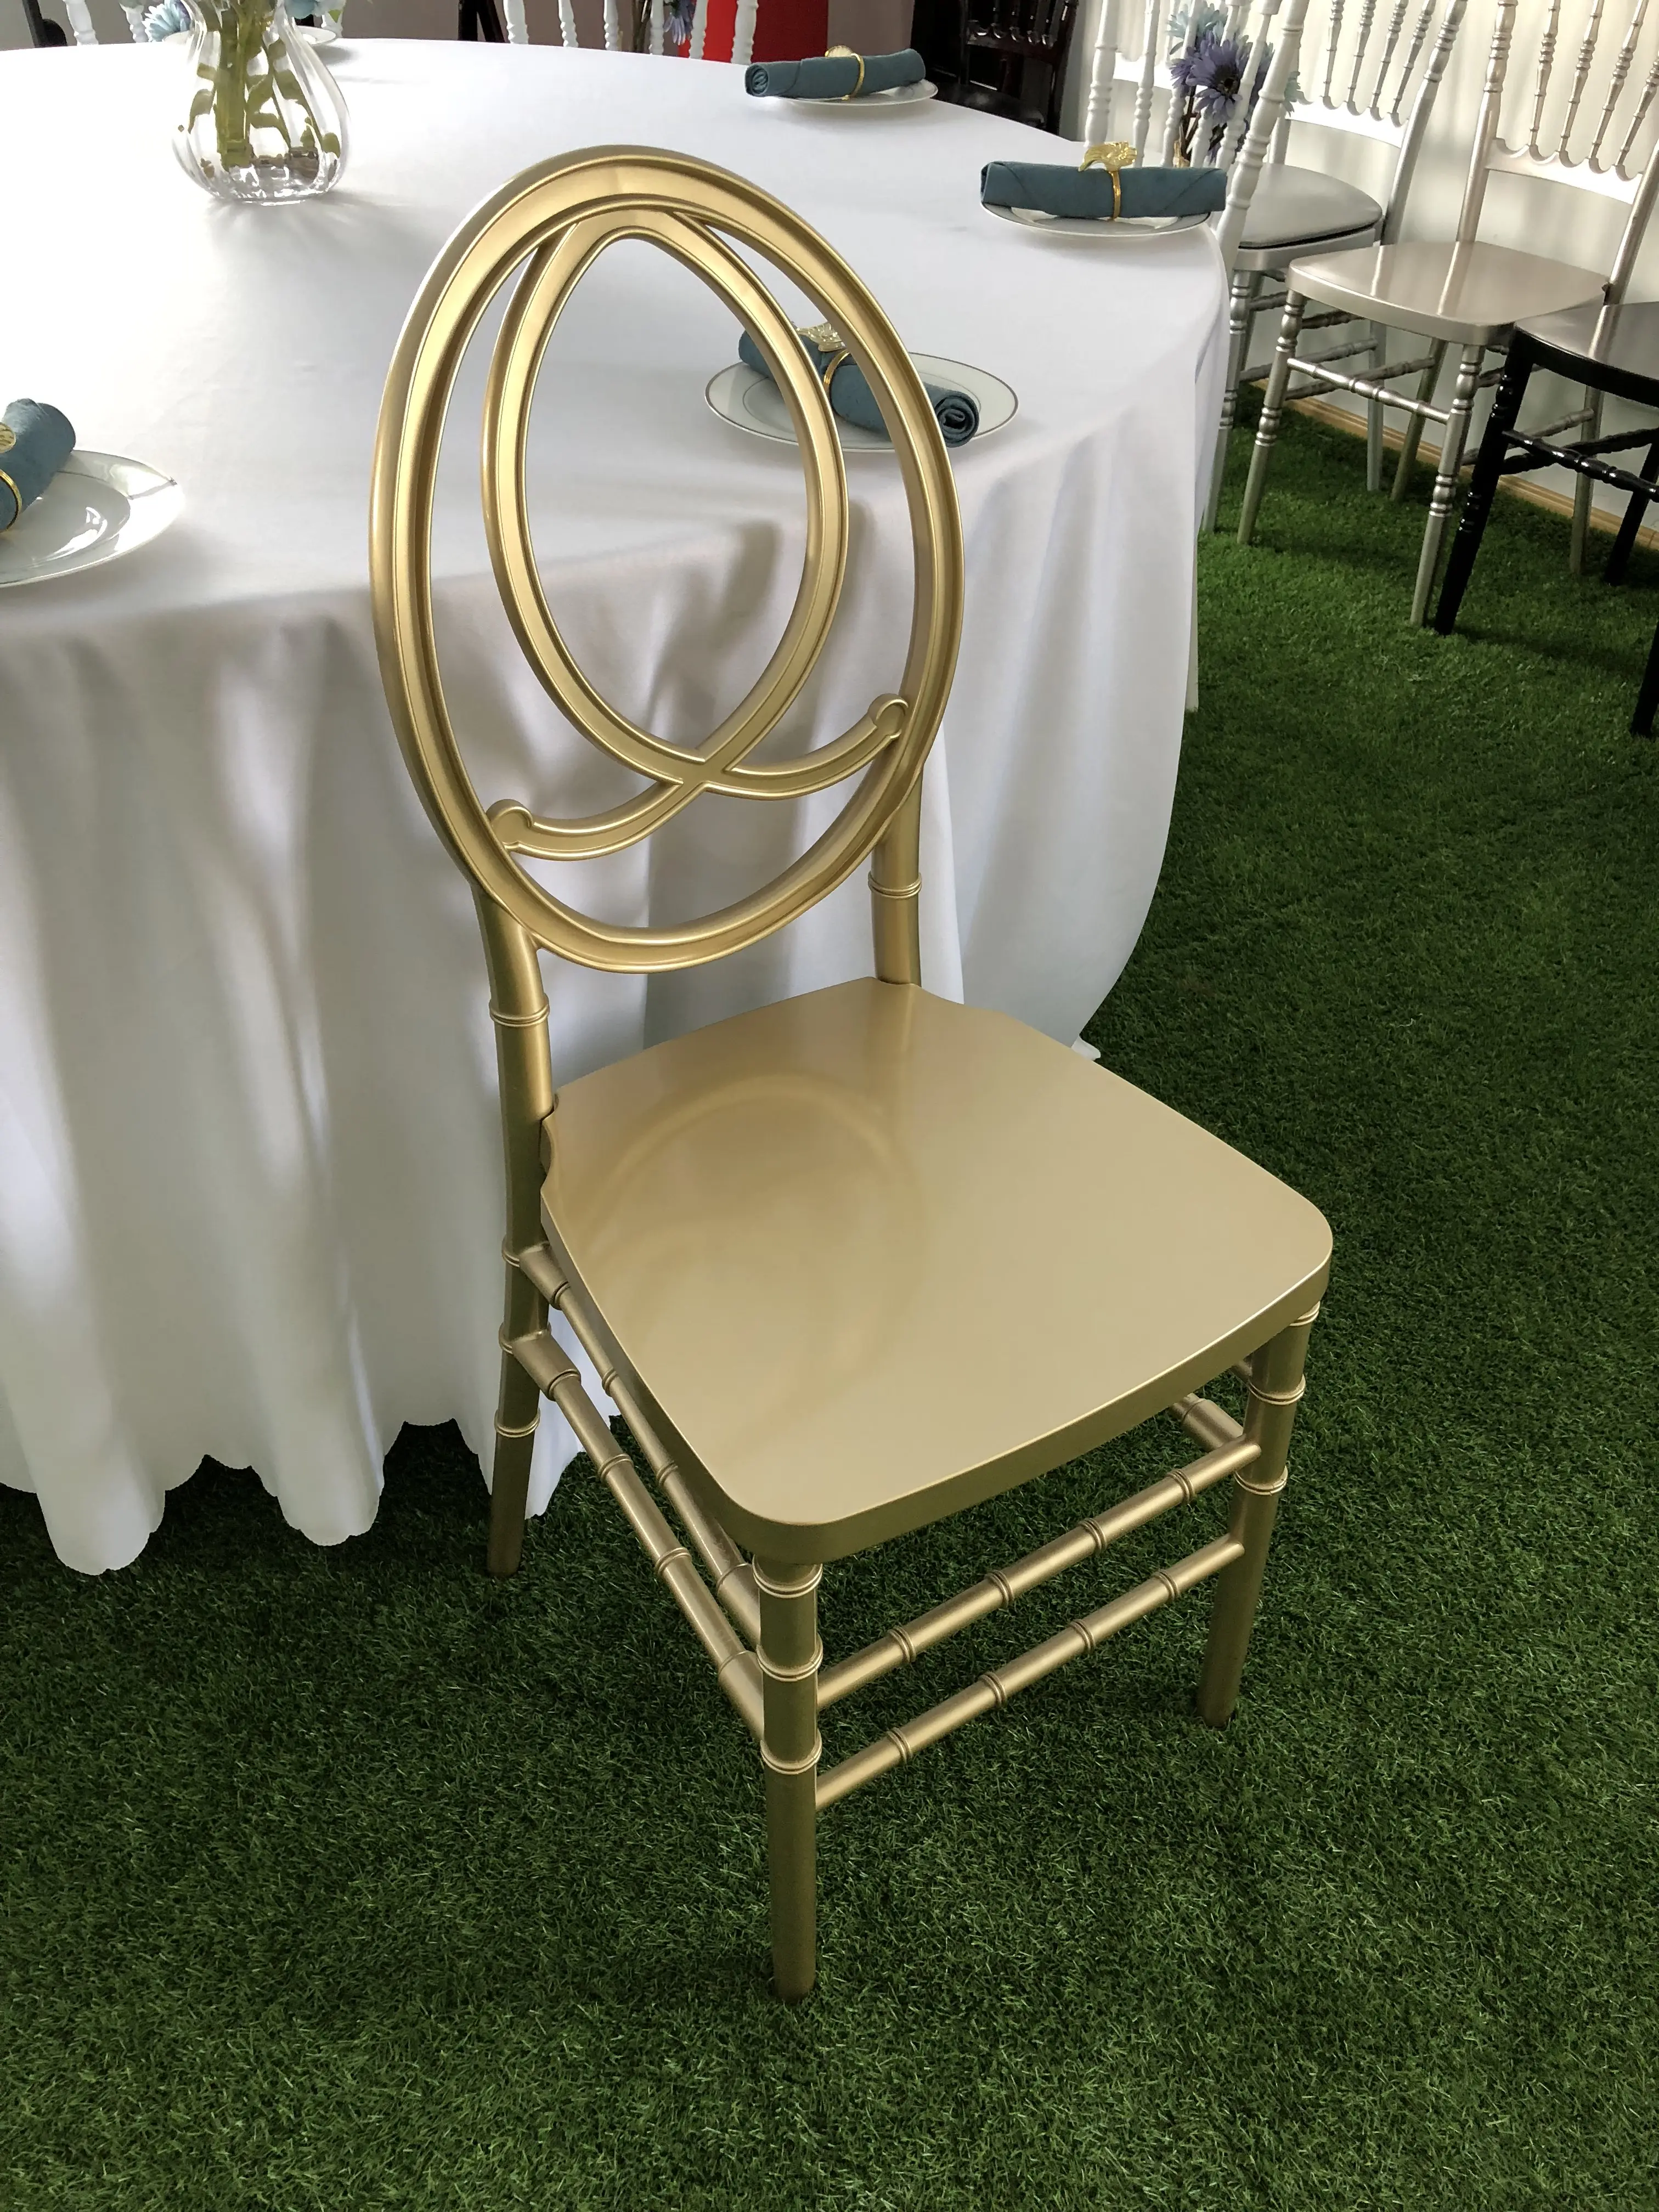 Crossback Chair Factory White Wood Plastic Outdoor Crossback American Chair For Wedding